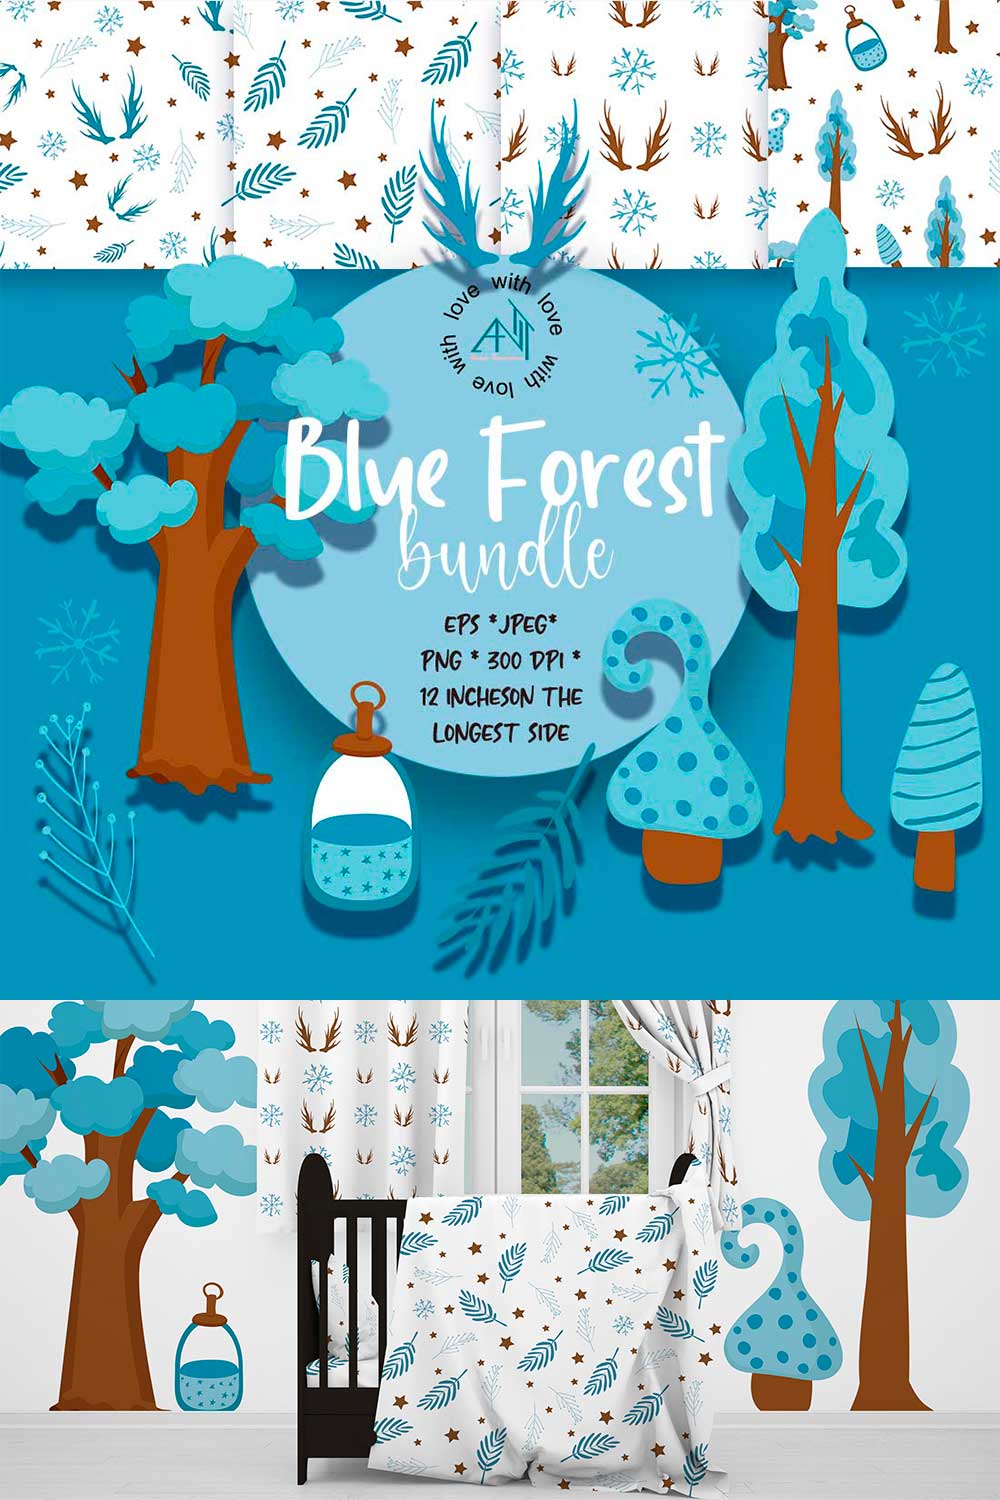 Blue forest patterns, clipart png,eps,jpeg pinterest preview image.